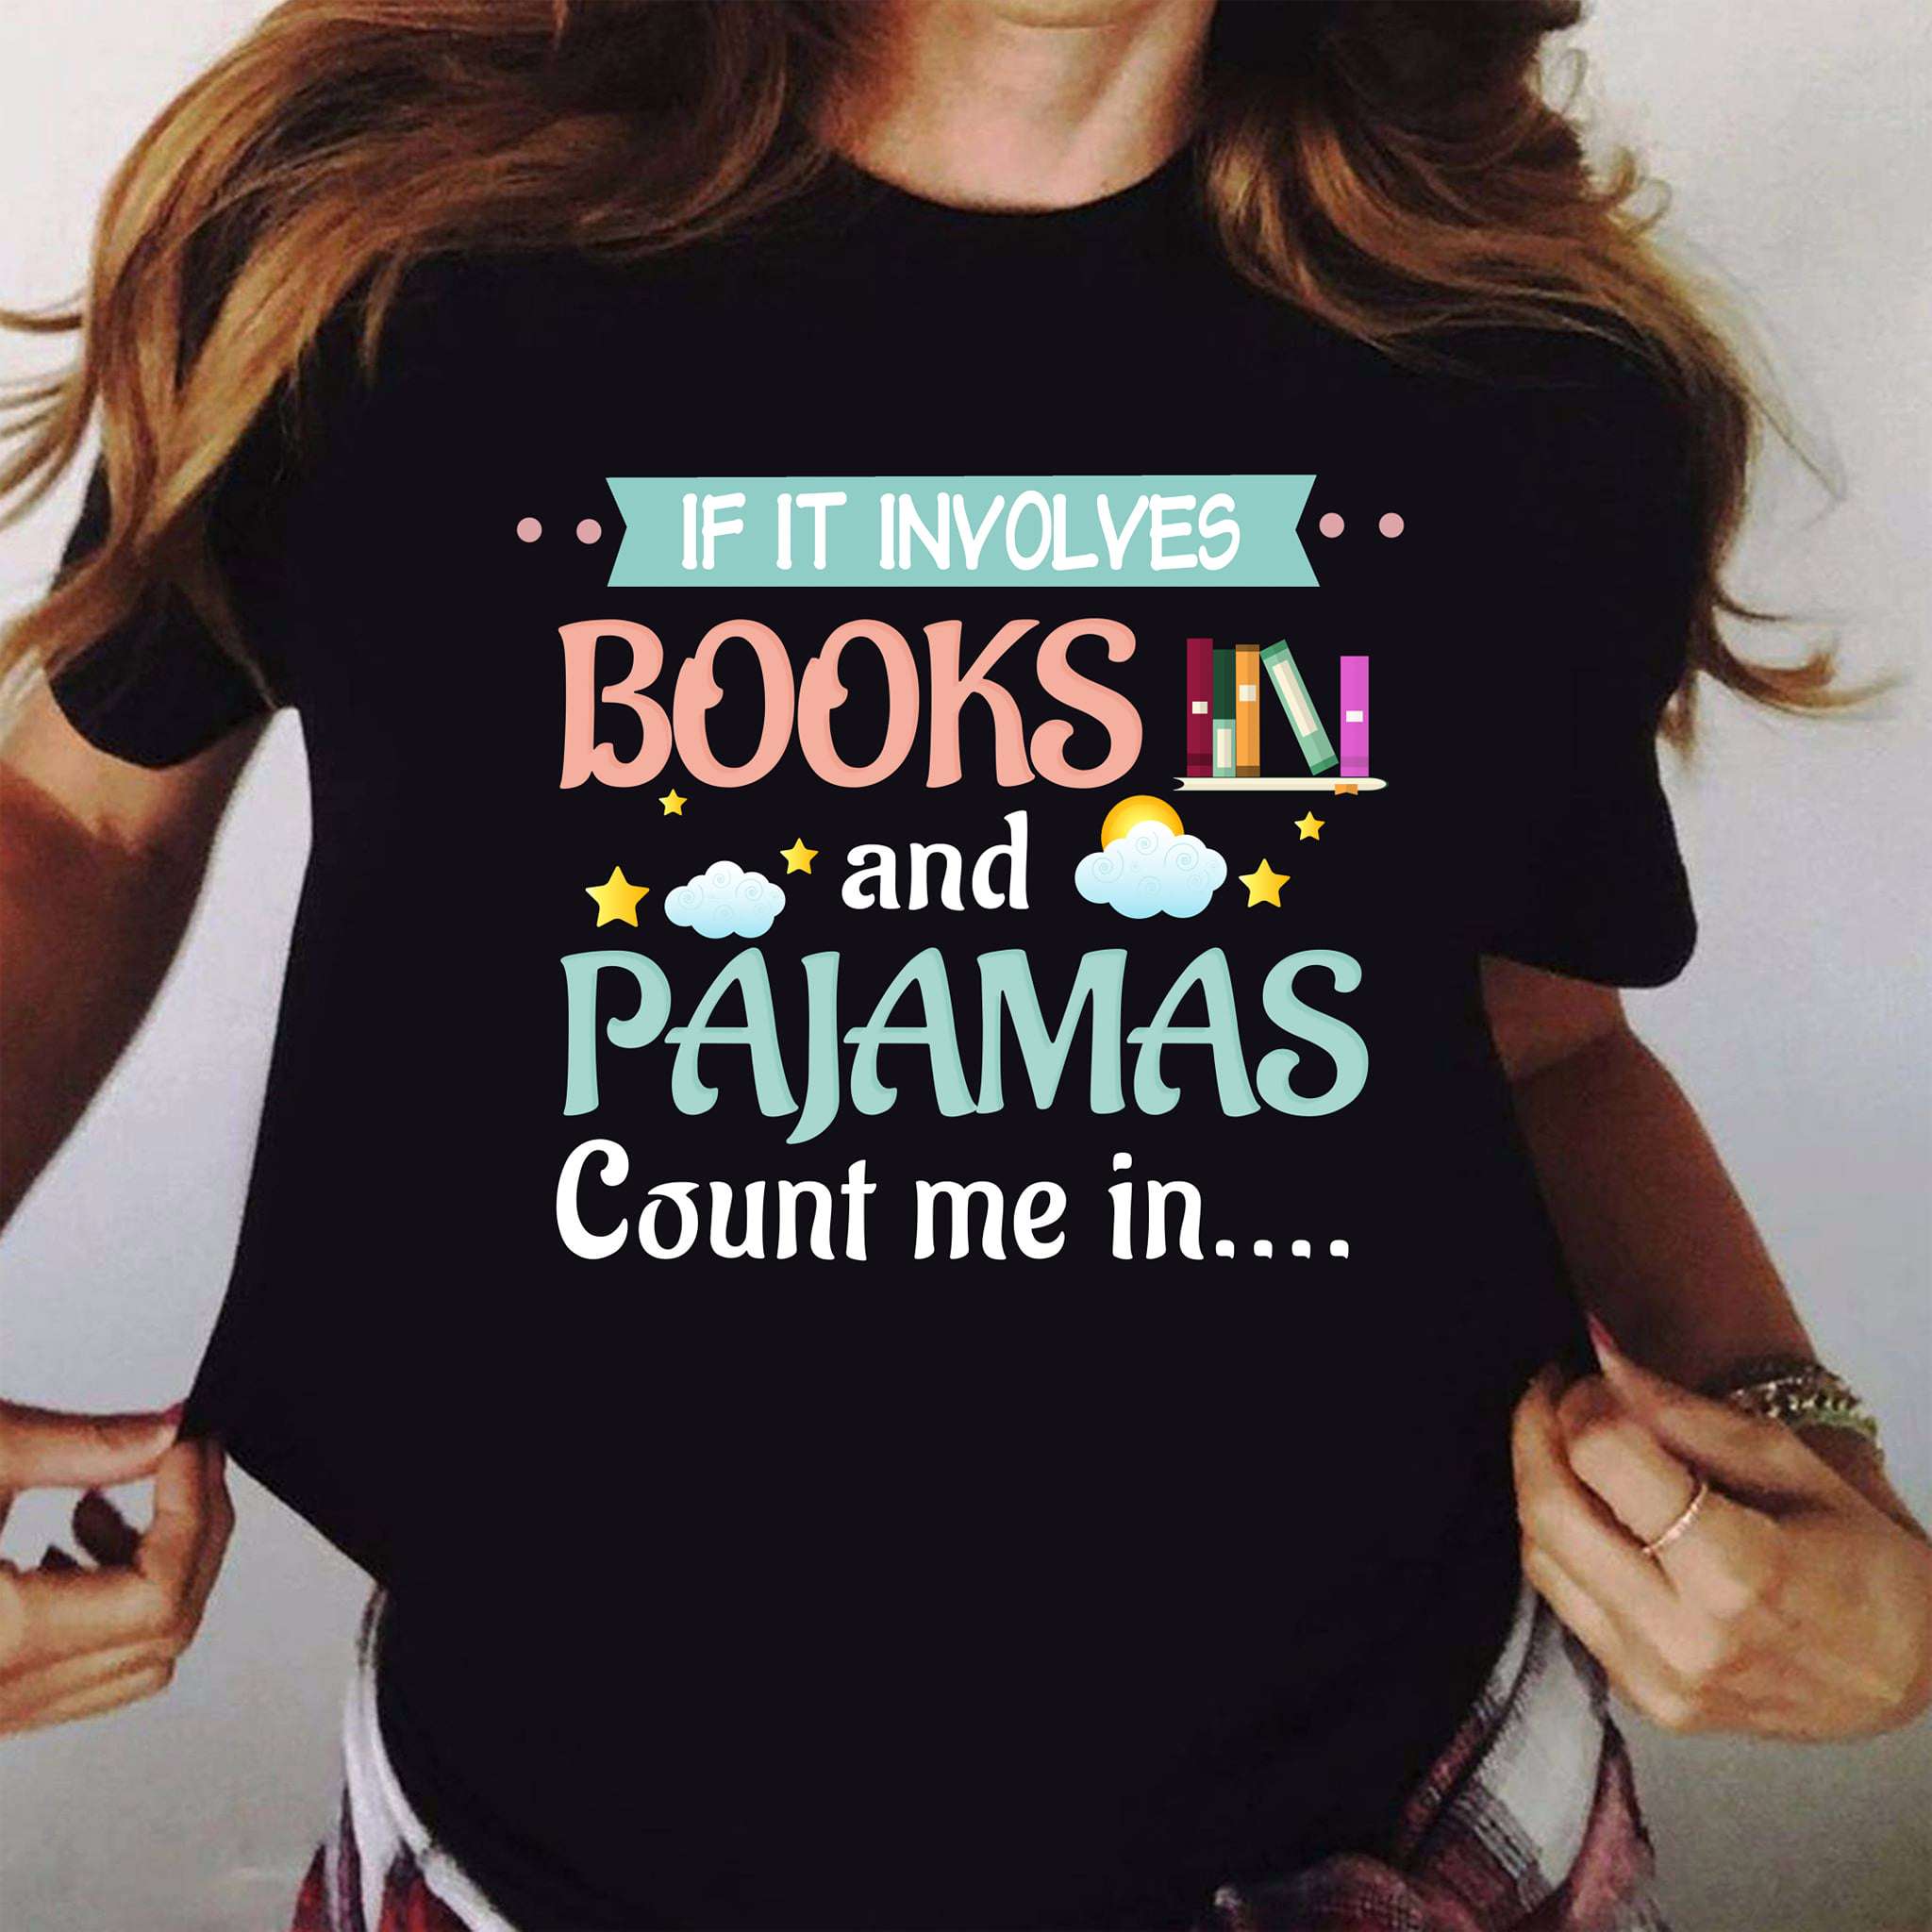 If it involves books and pajamas count me in - T-shirt for bookaholic, read book bedtime